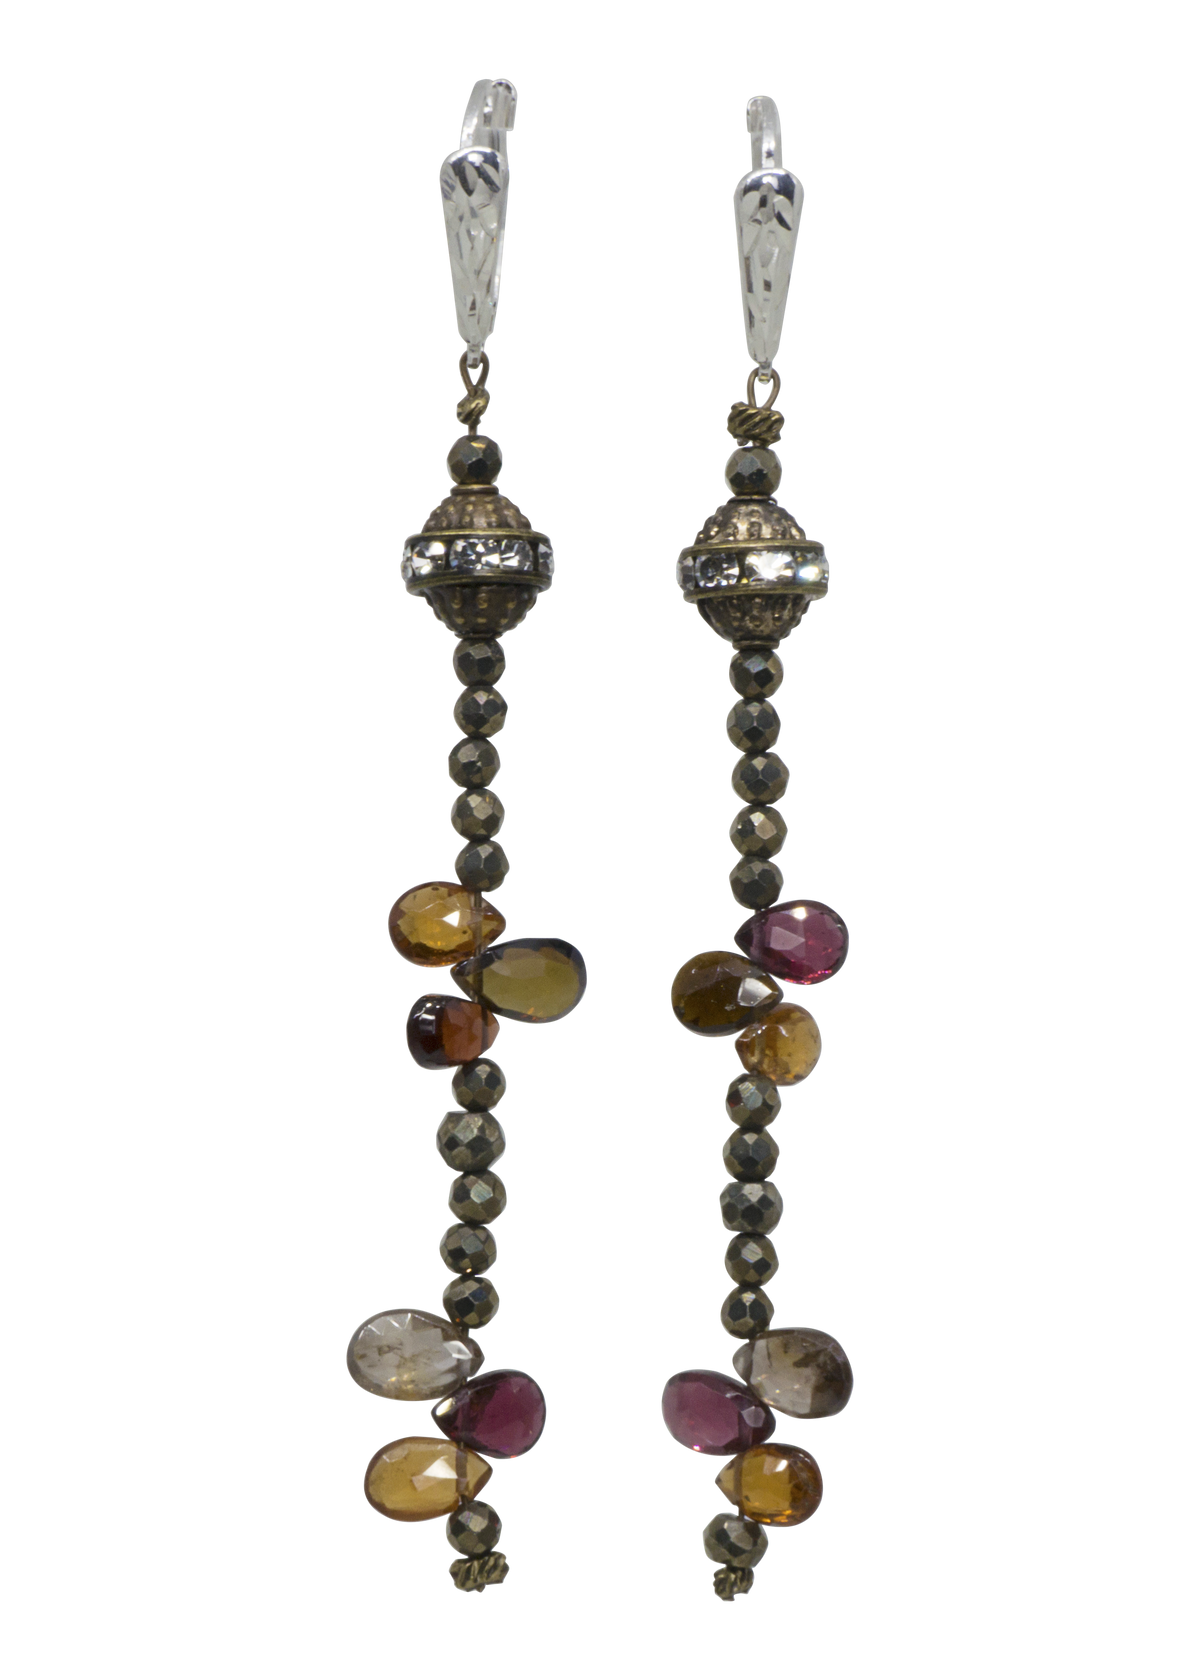 Tundra Sapphire and Pyrite Earrings (L)